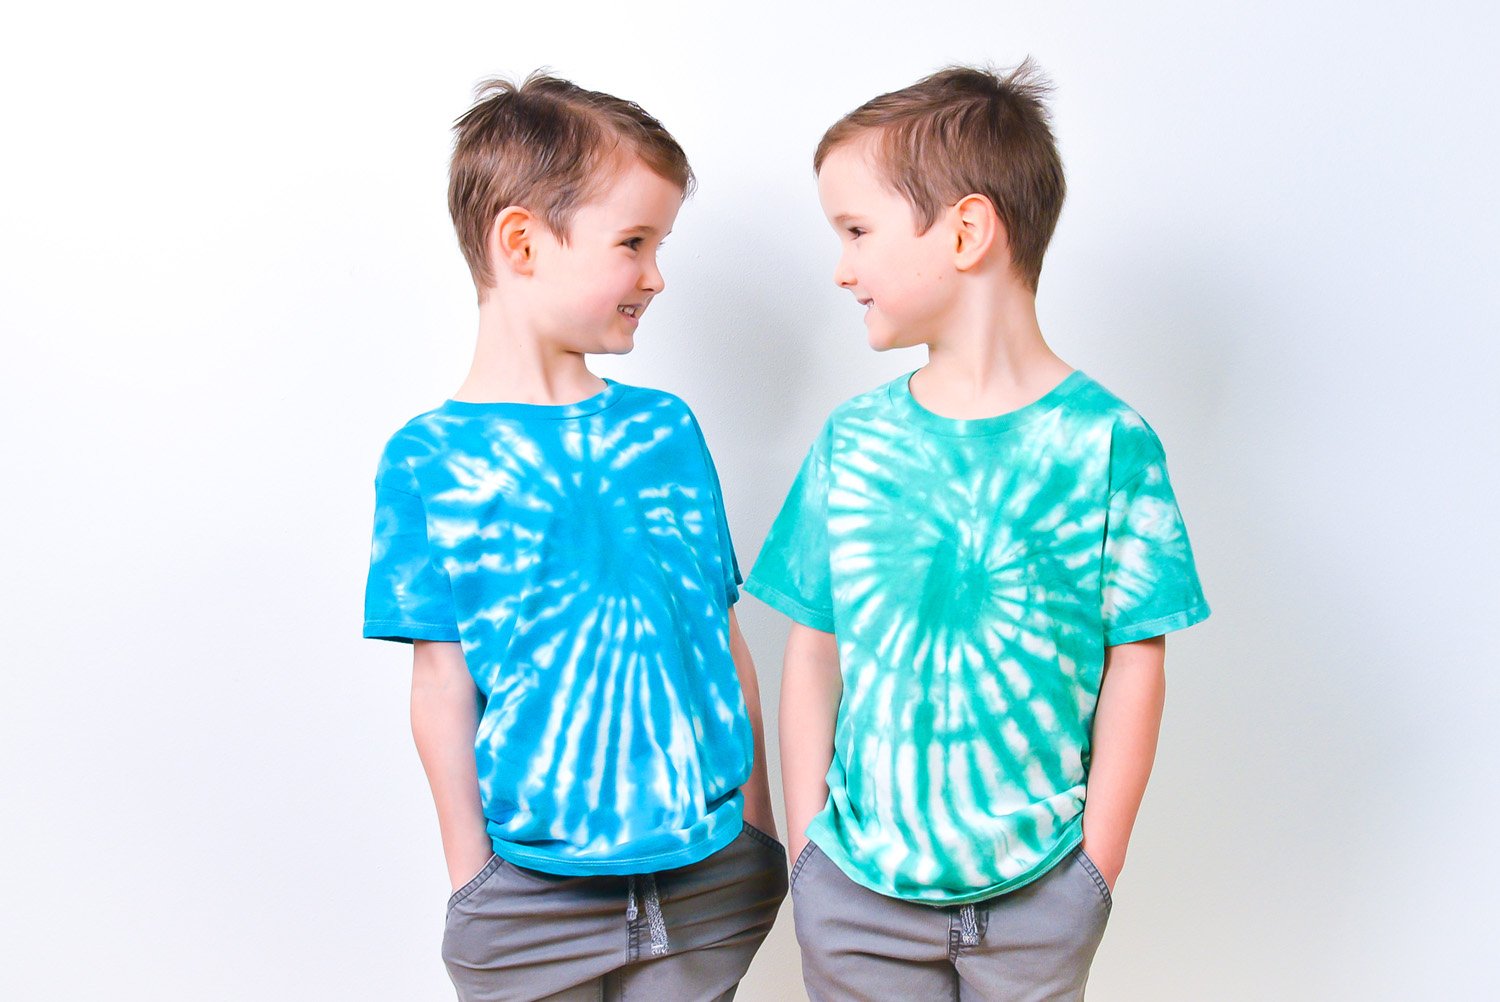 Two 5-year-old twin boys in green and blue tie-dye shirts looking at one another like mirror images